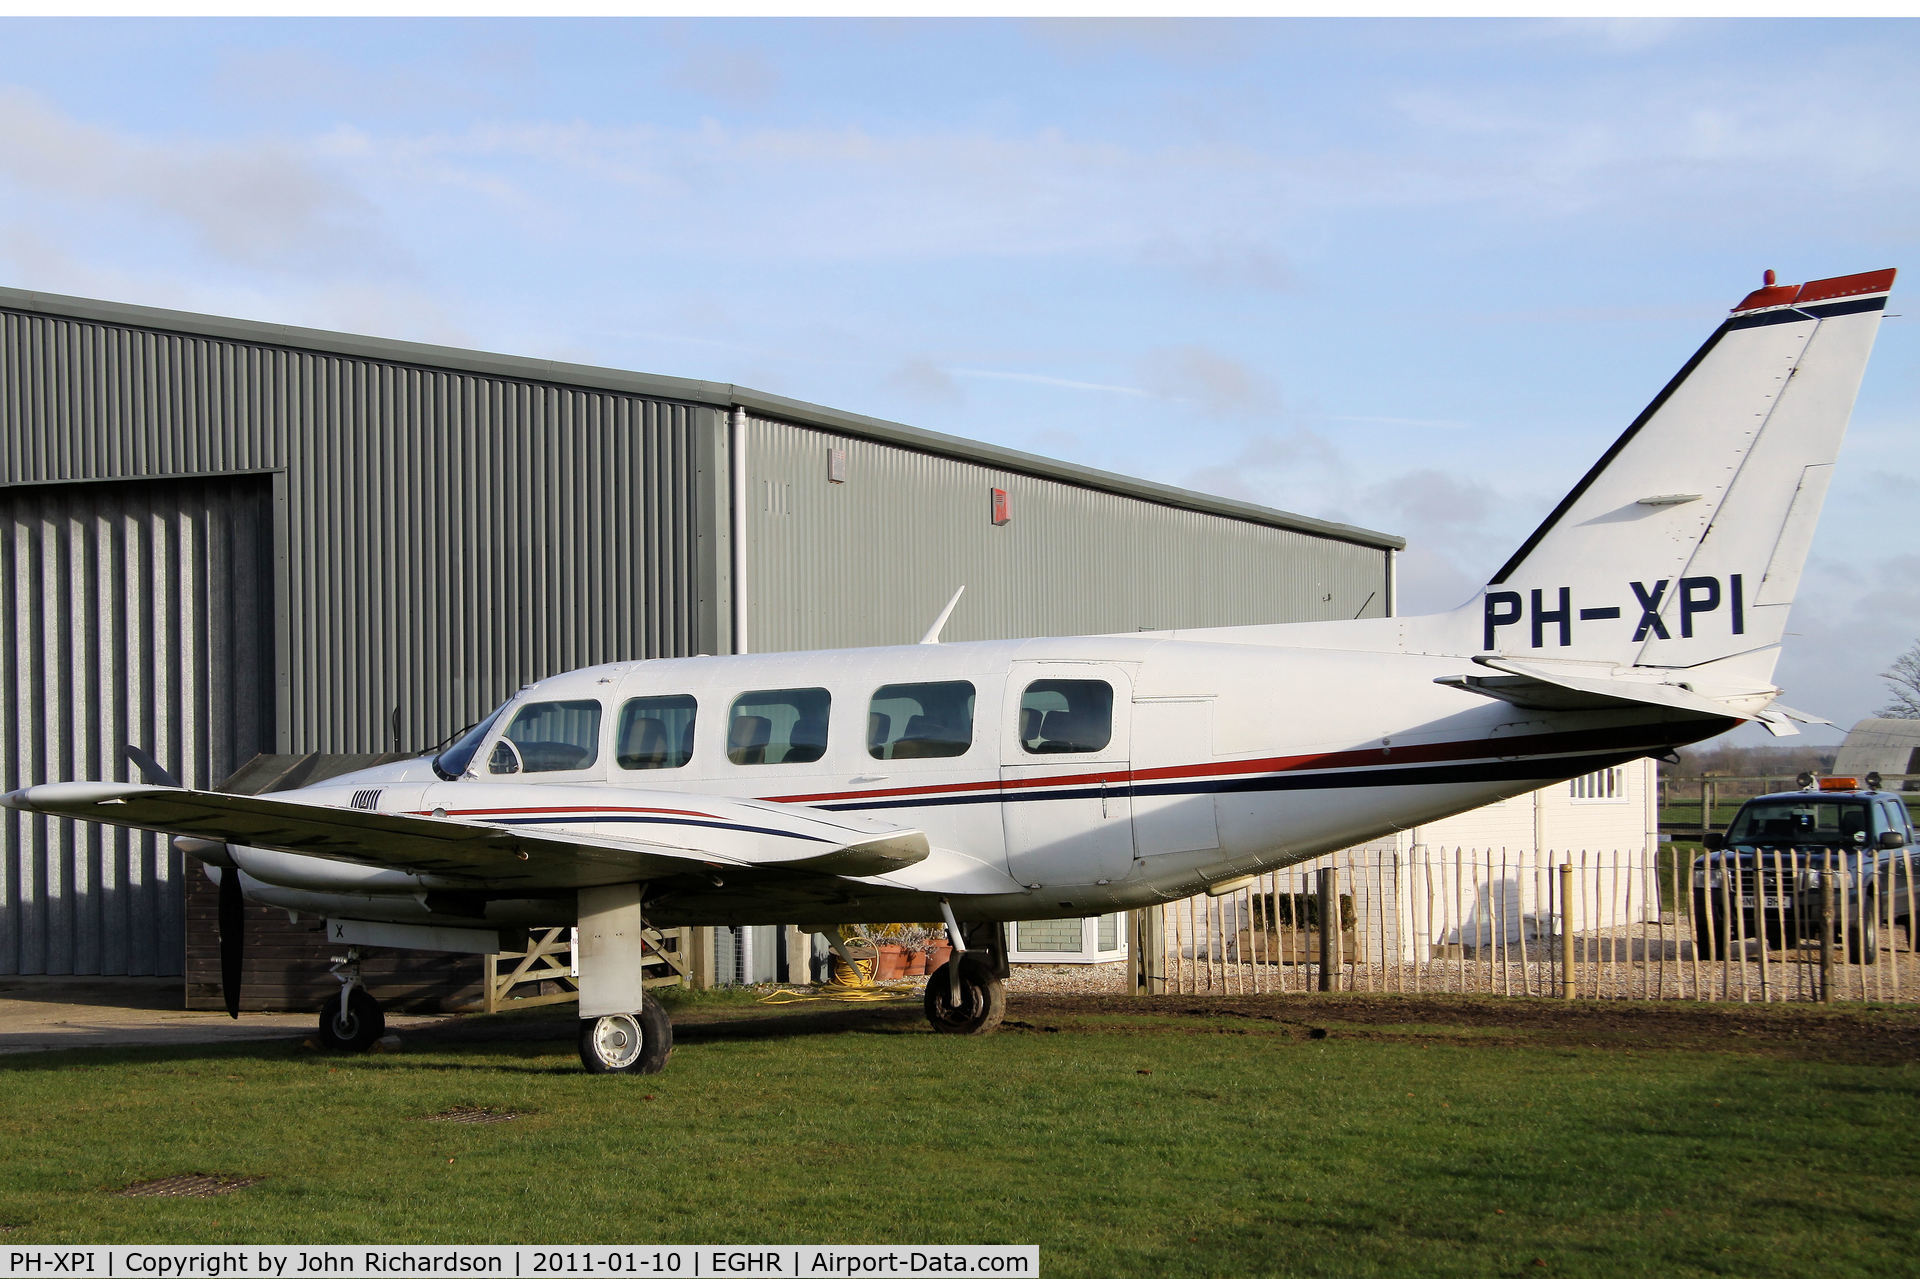 PH-XPI, 1977 Piper PA-31-350 Chieftain C/N 31-7752187, Parked outside Maintenance Hangar